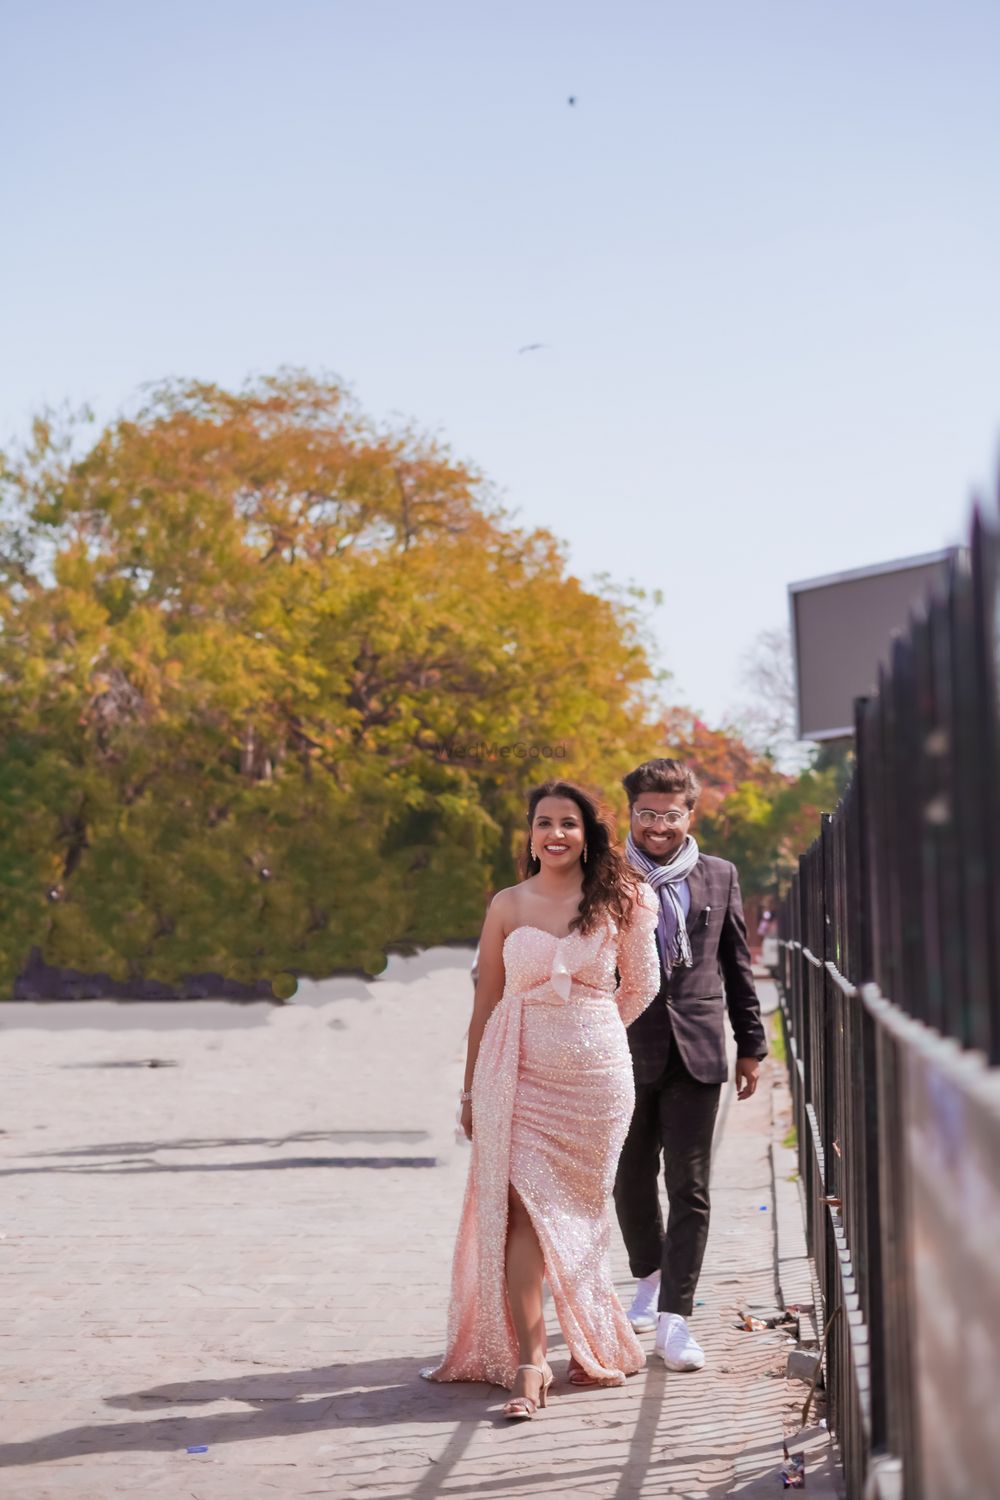 Photo From Pre Wedding Shoot - By Styleology Films